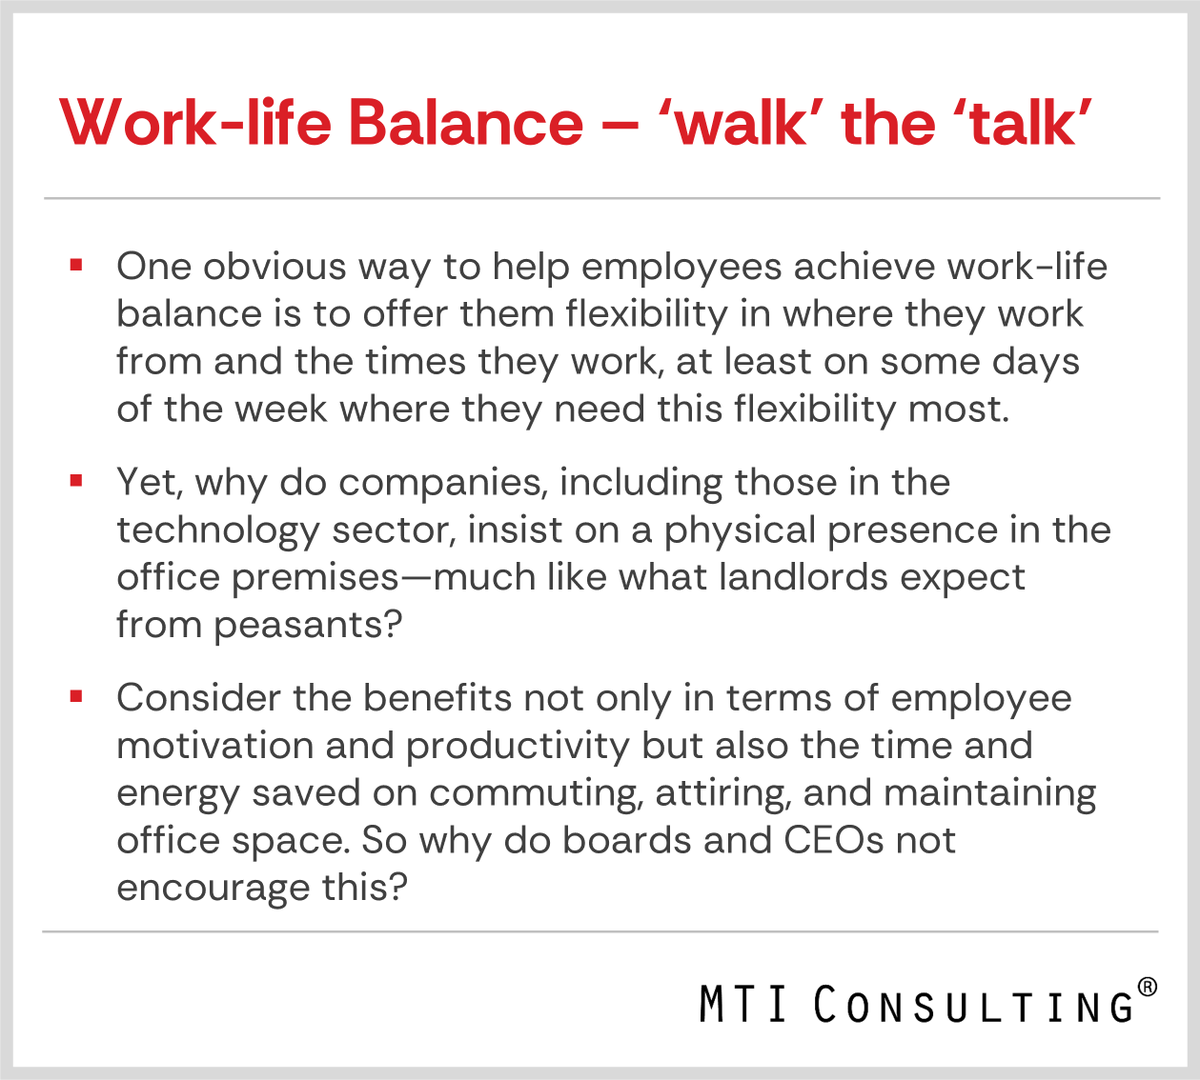 Work-life Balance – ‘walk’ the ‘talk’

Learn more about MTI’s Thought Leadership: mtiworldwide.com/media-thought-…

#MTIStrategicReflections #Strategy #WorkLifeBalance 
#FlexibleWorking  #EmployeeWellbeing #CorporateCulture #Leadership